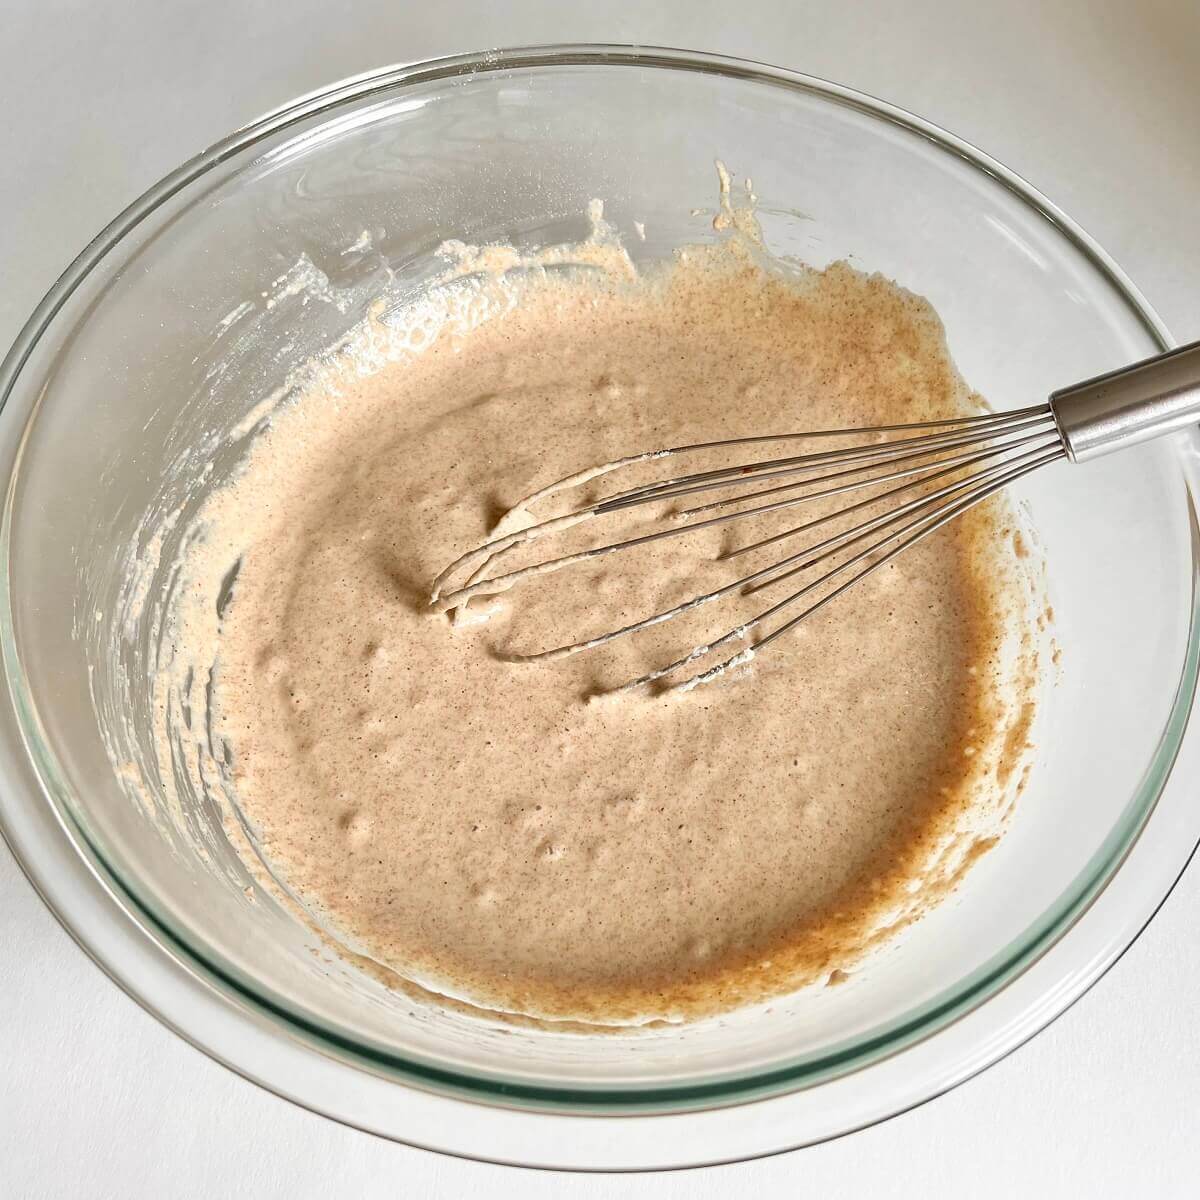 Thick pancake batter being stirred with a whisk in a glass mixing bowl.